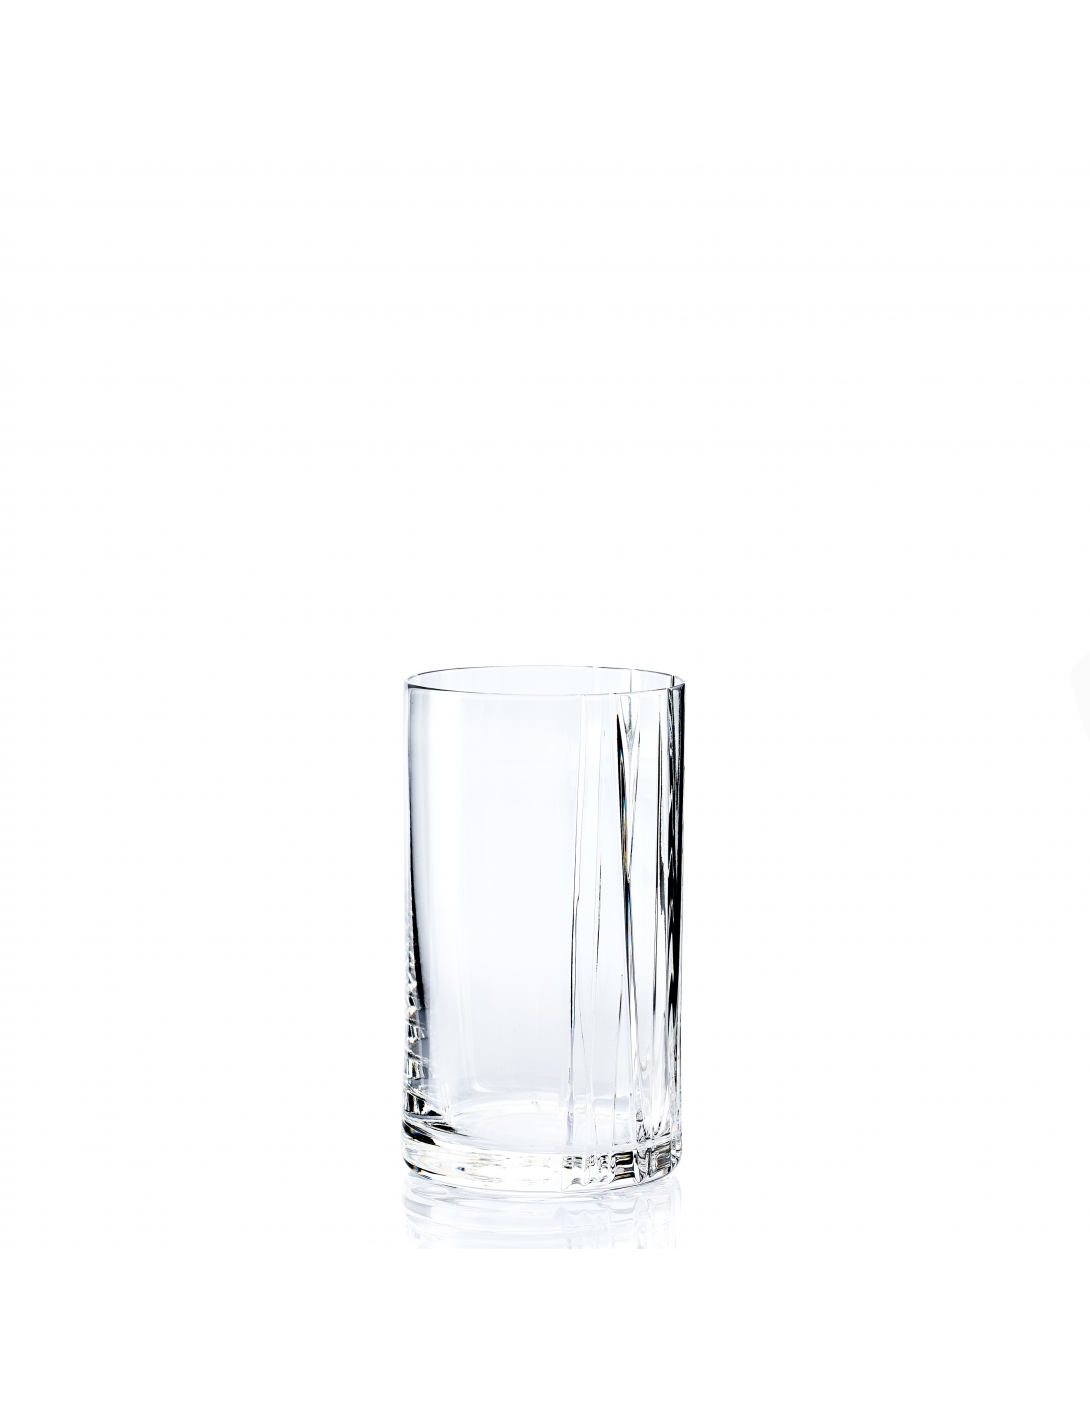 Fifty-Fifty HB tumbler set of 6 pieces